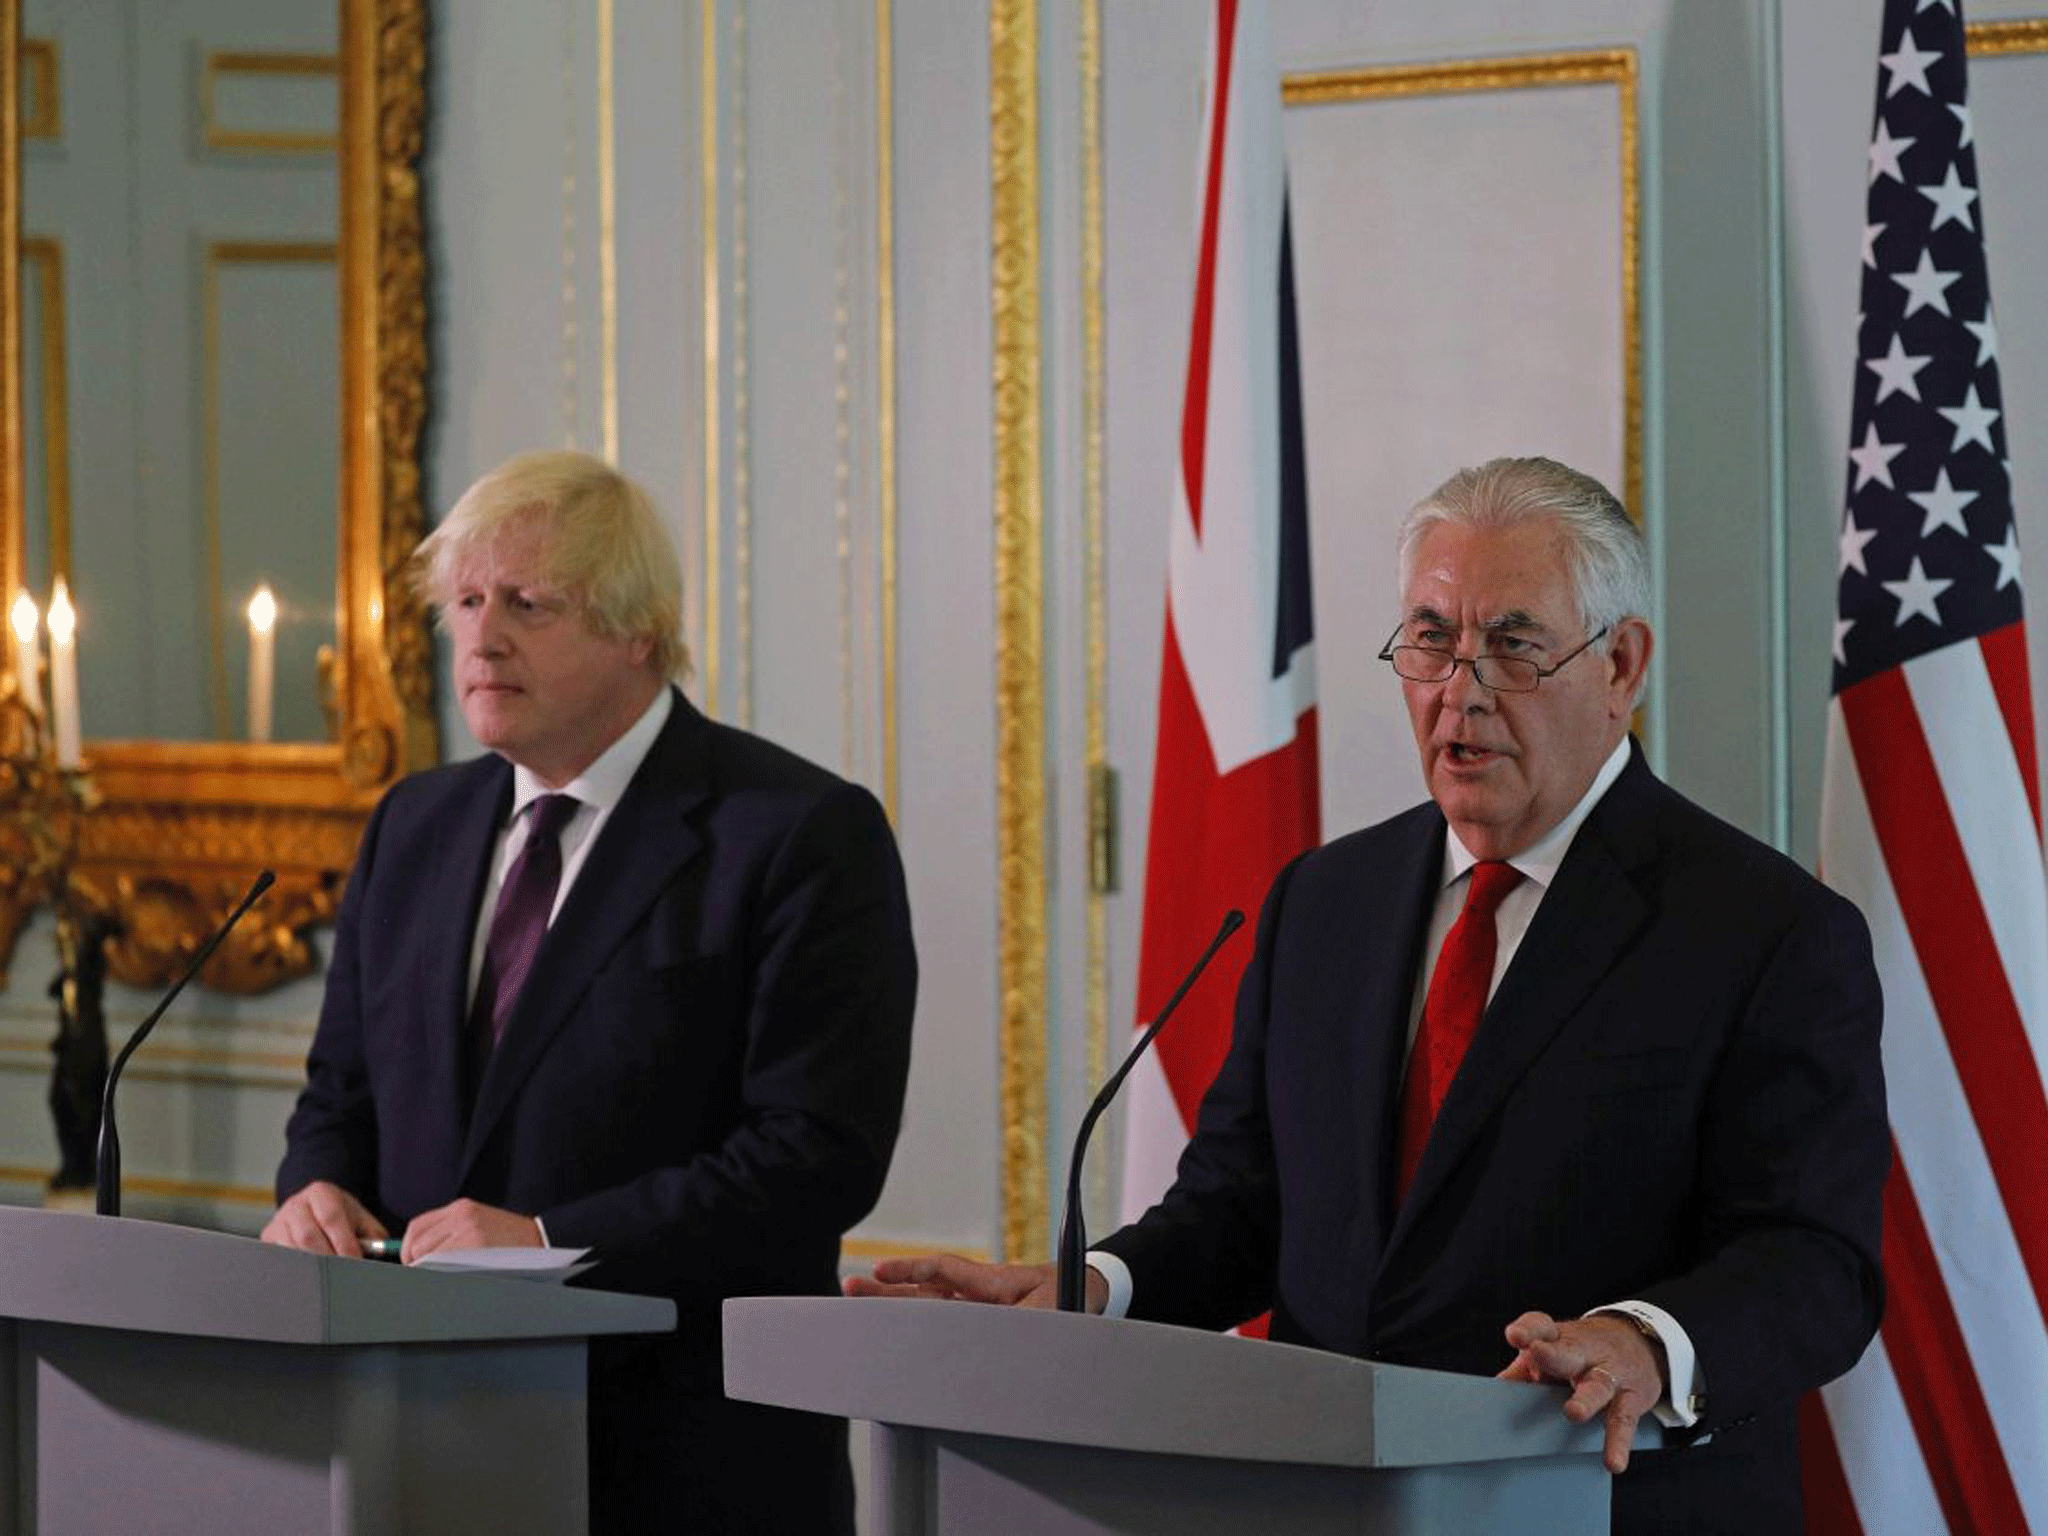 The US Secretary of State made a snap visit to the UK, meeting with Boris Johnson, following the incident